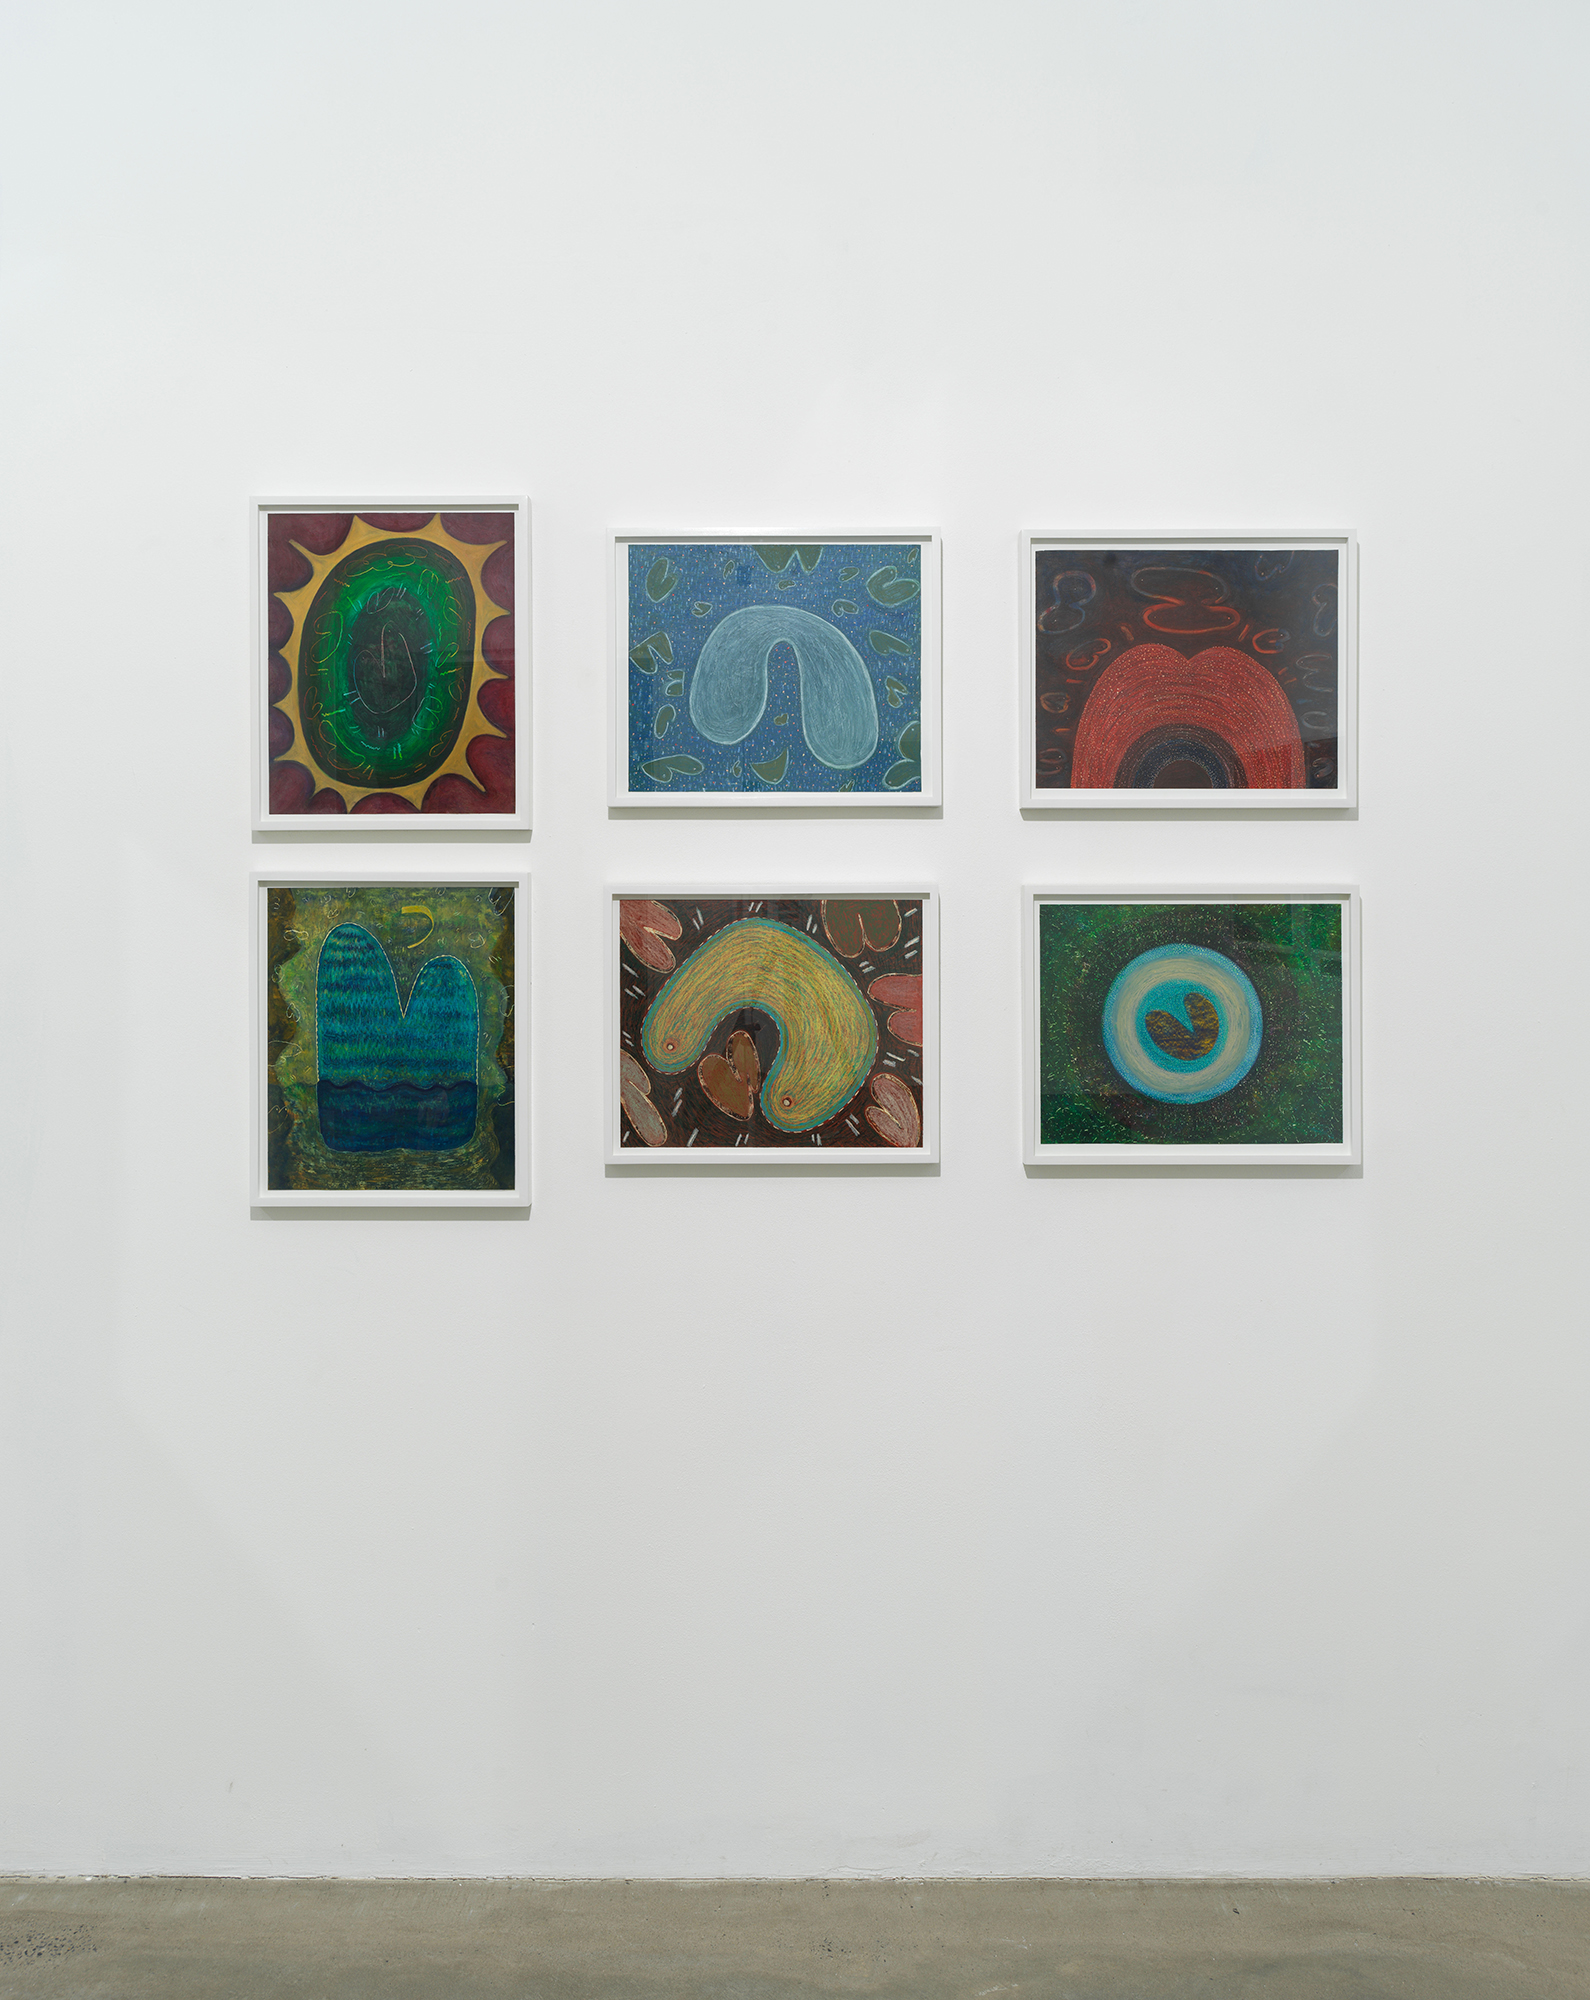 Installation view of works on paper by Ping Zheng showing grid of small works